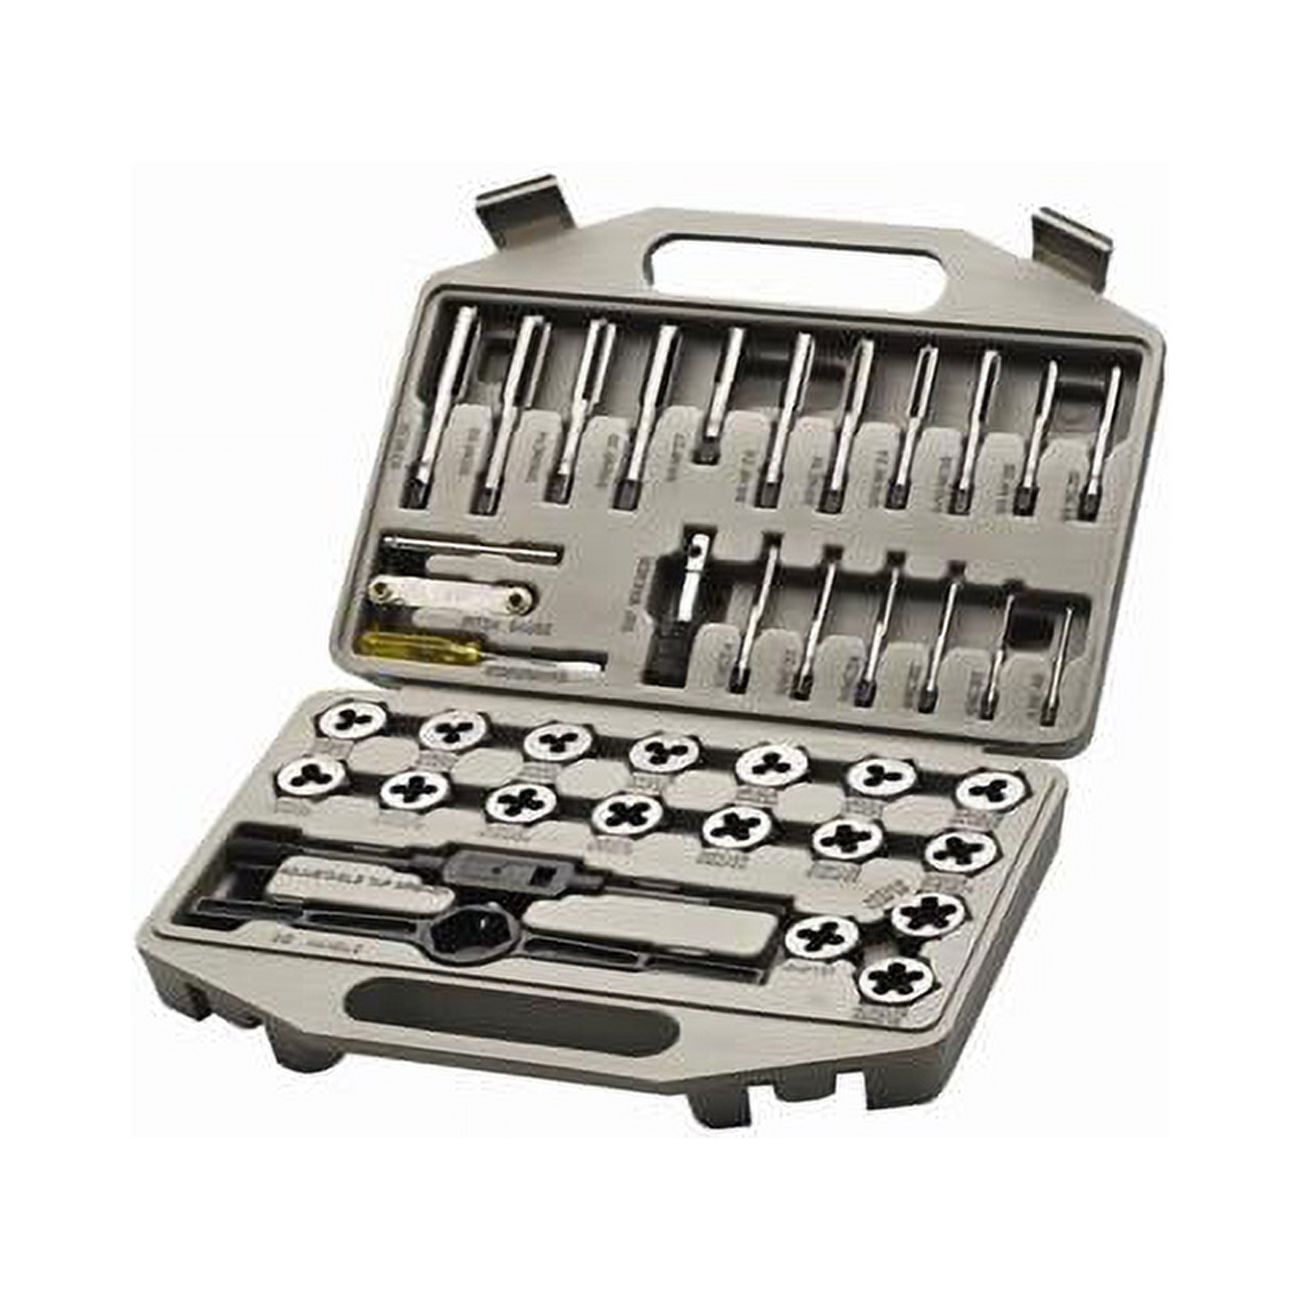 Picture of Allied 49035 SAE Tap & Die Tool Set - 41 Piece